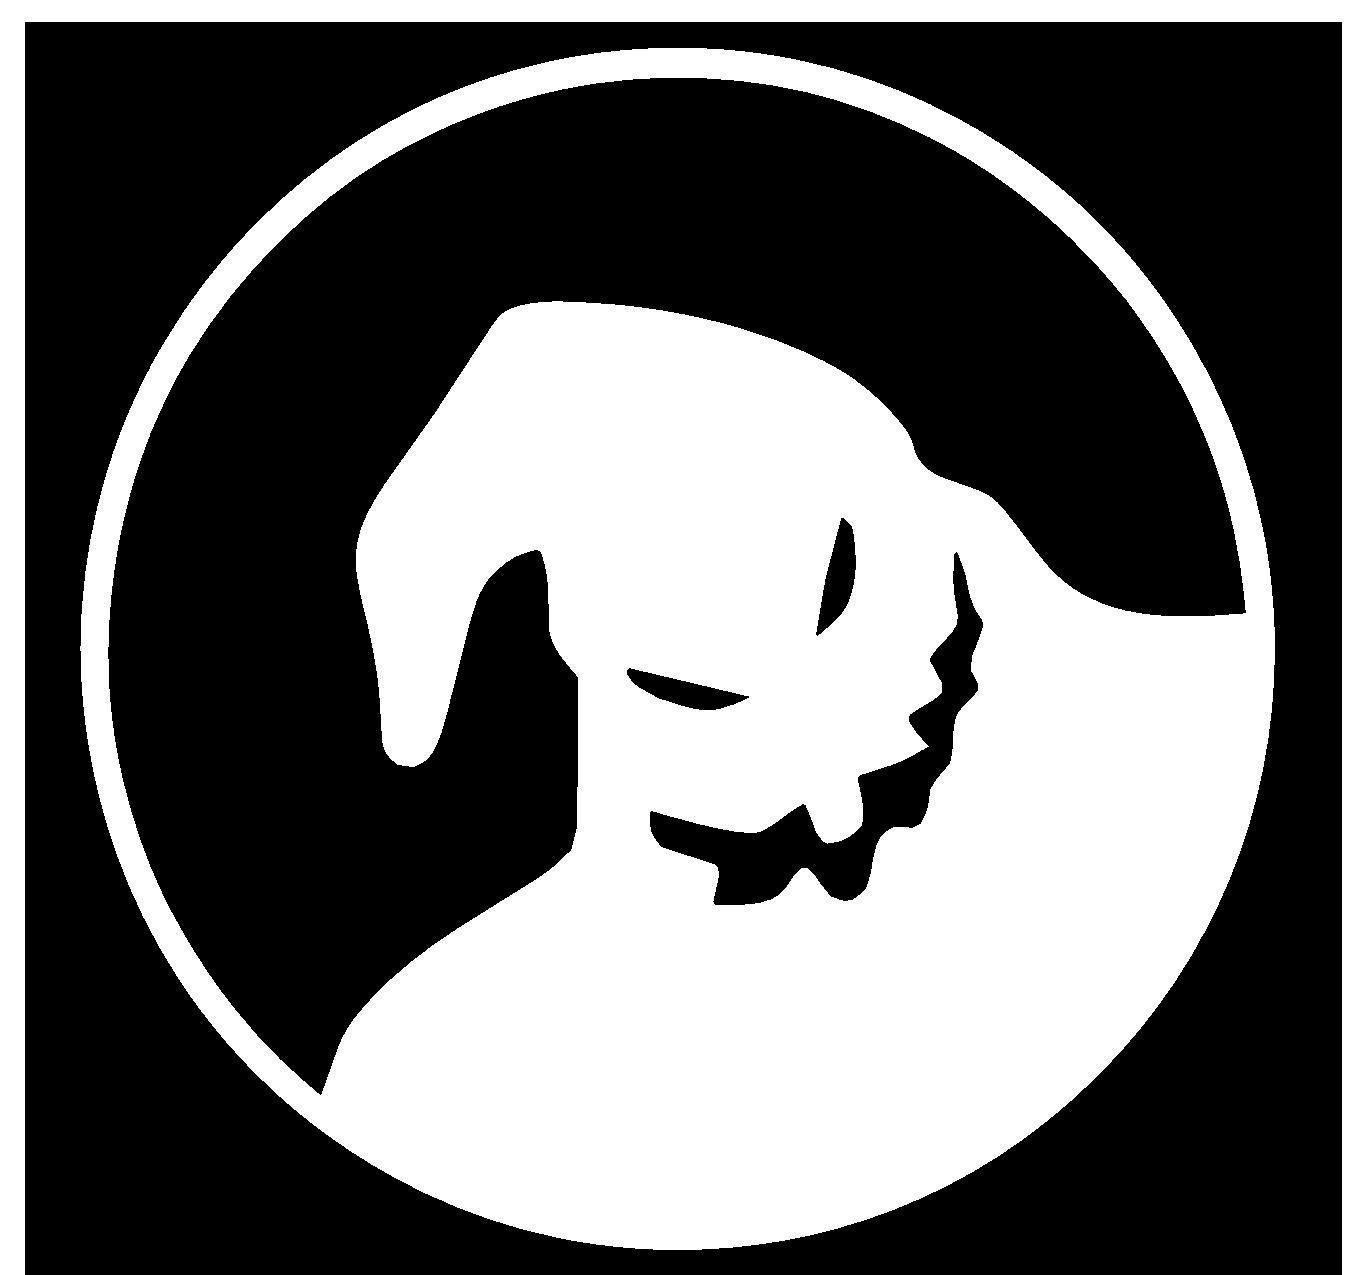 Download Nightmare Before Christmas Oogie Boogie by VinylsWithCharacter